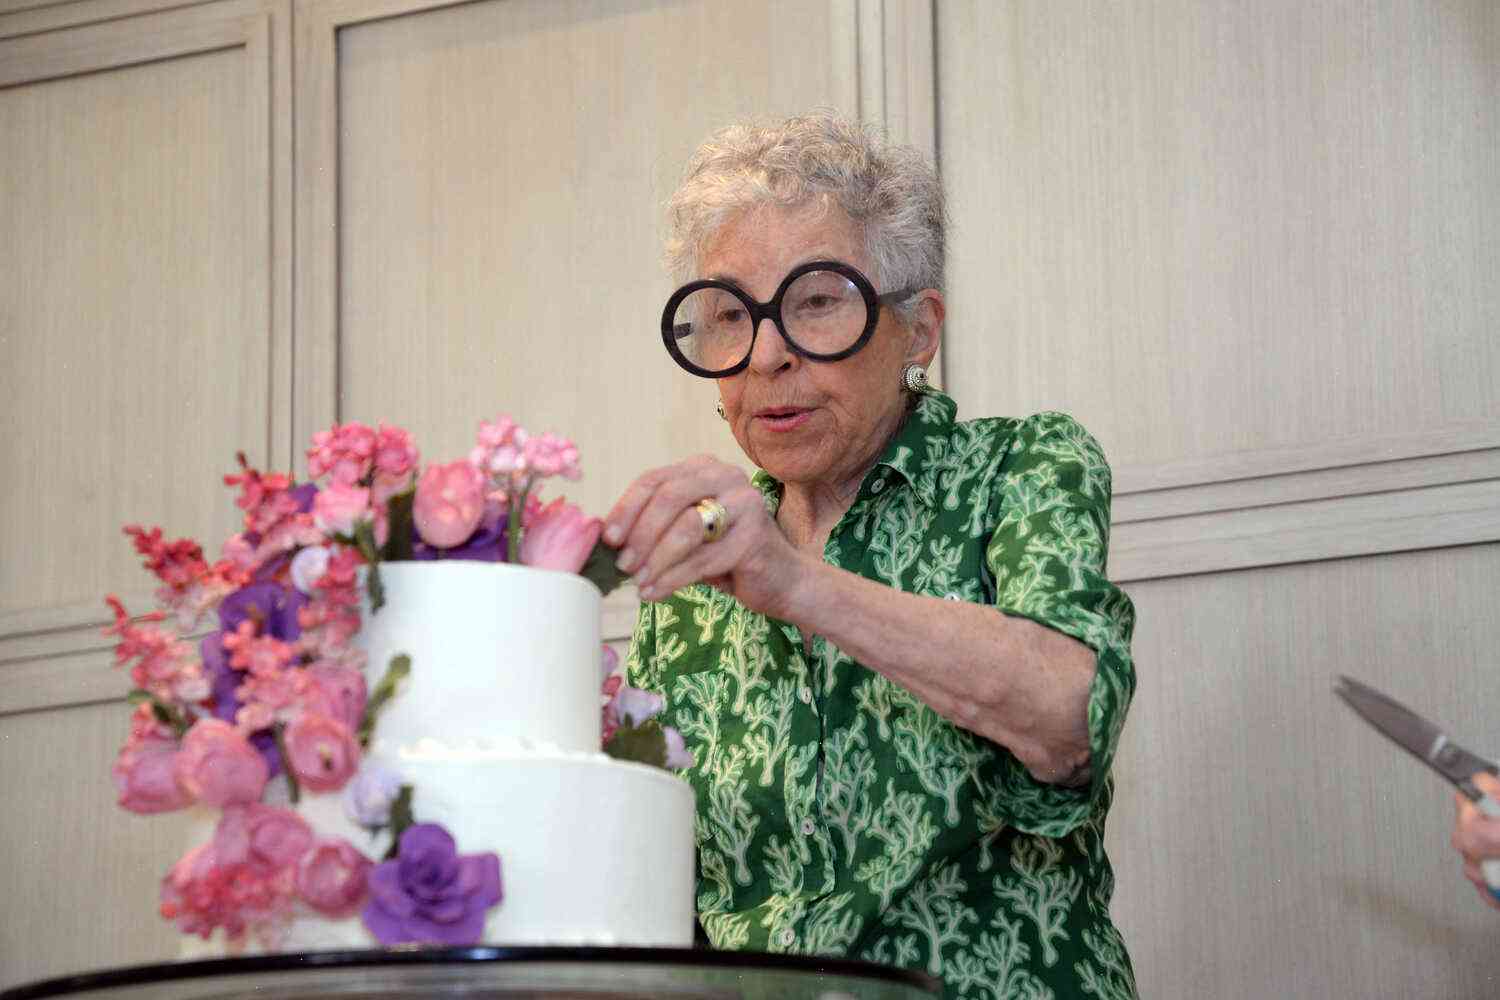 The creator of Sylvia's cakes has died at 91